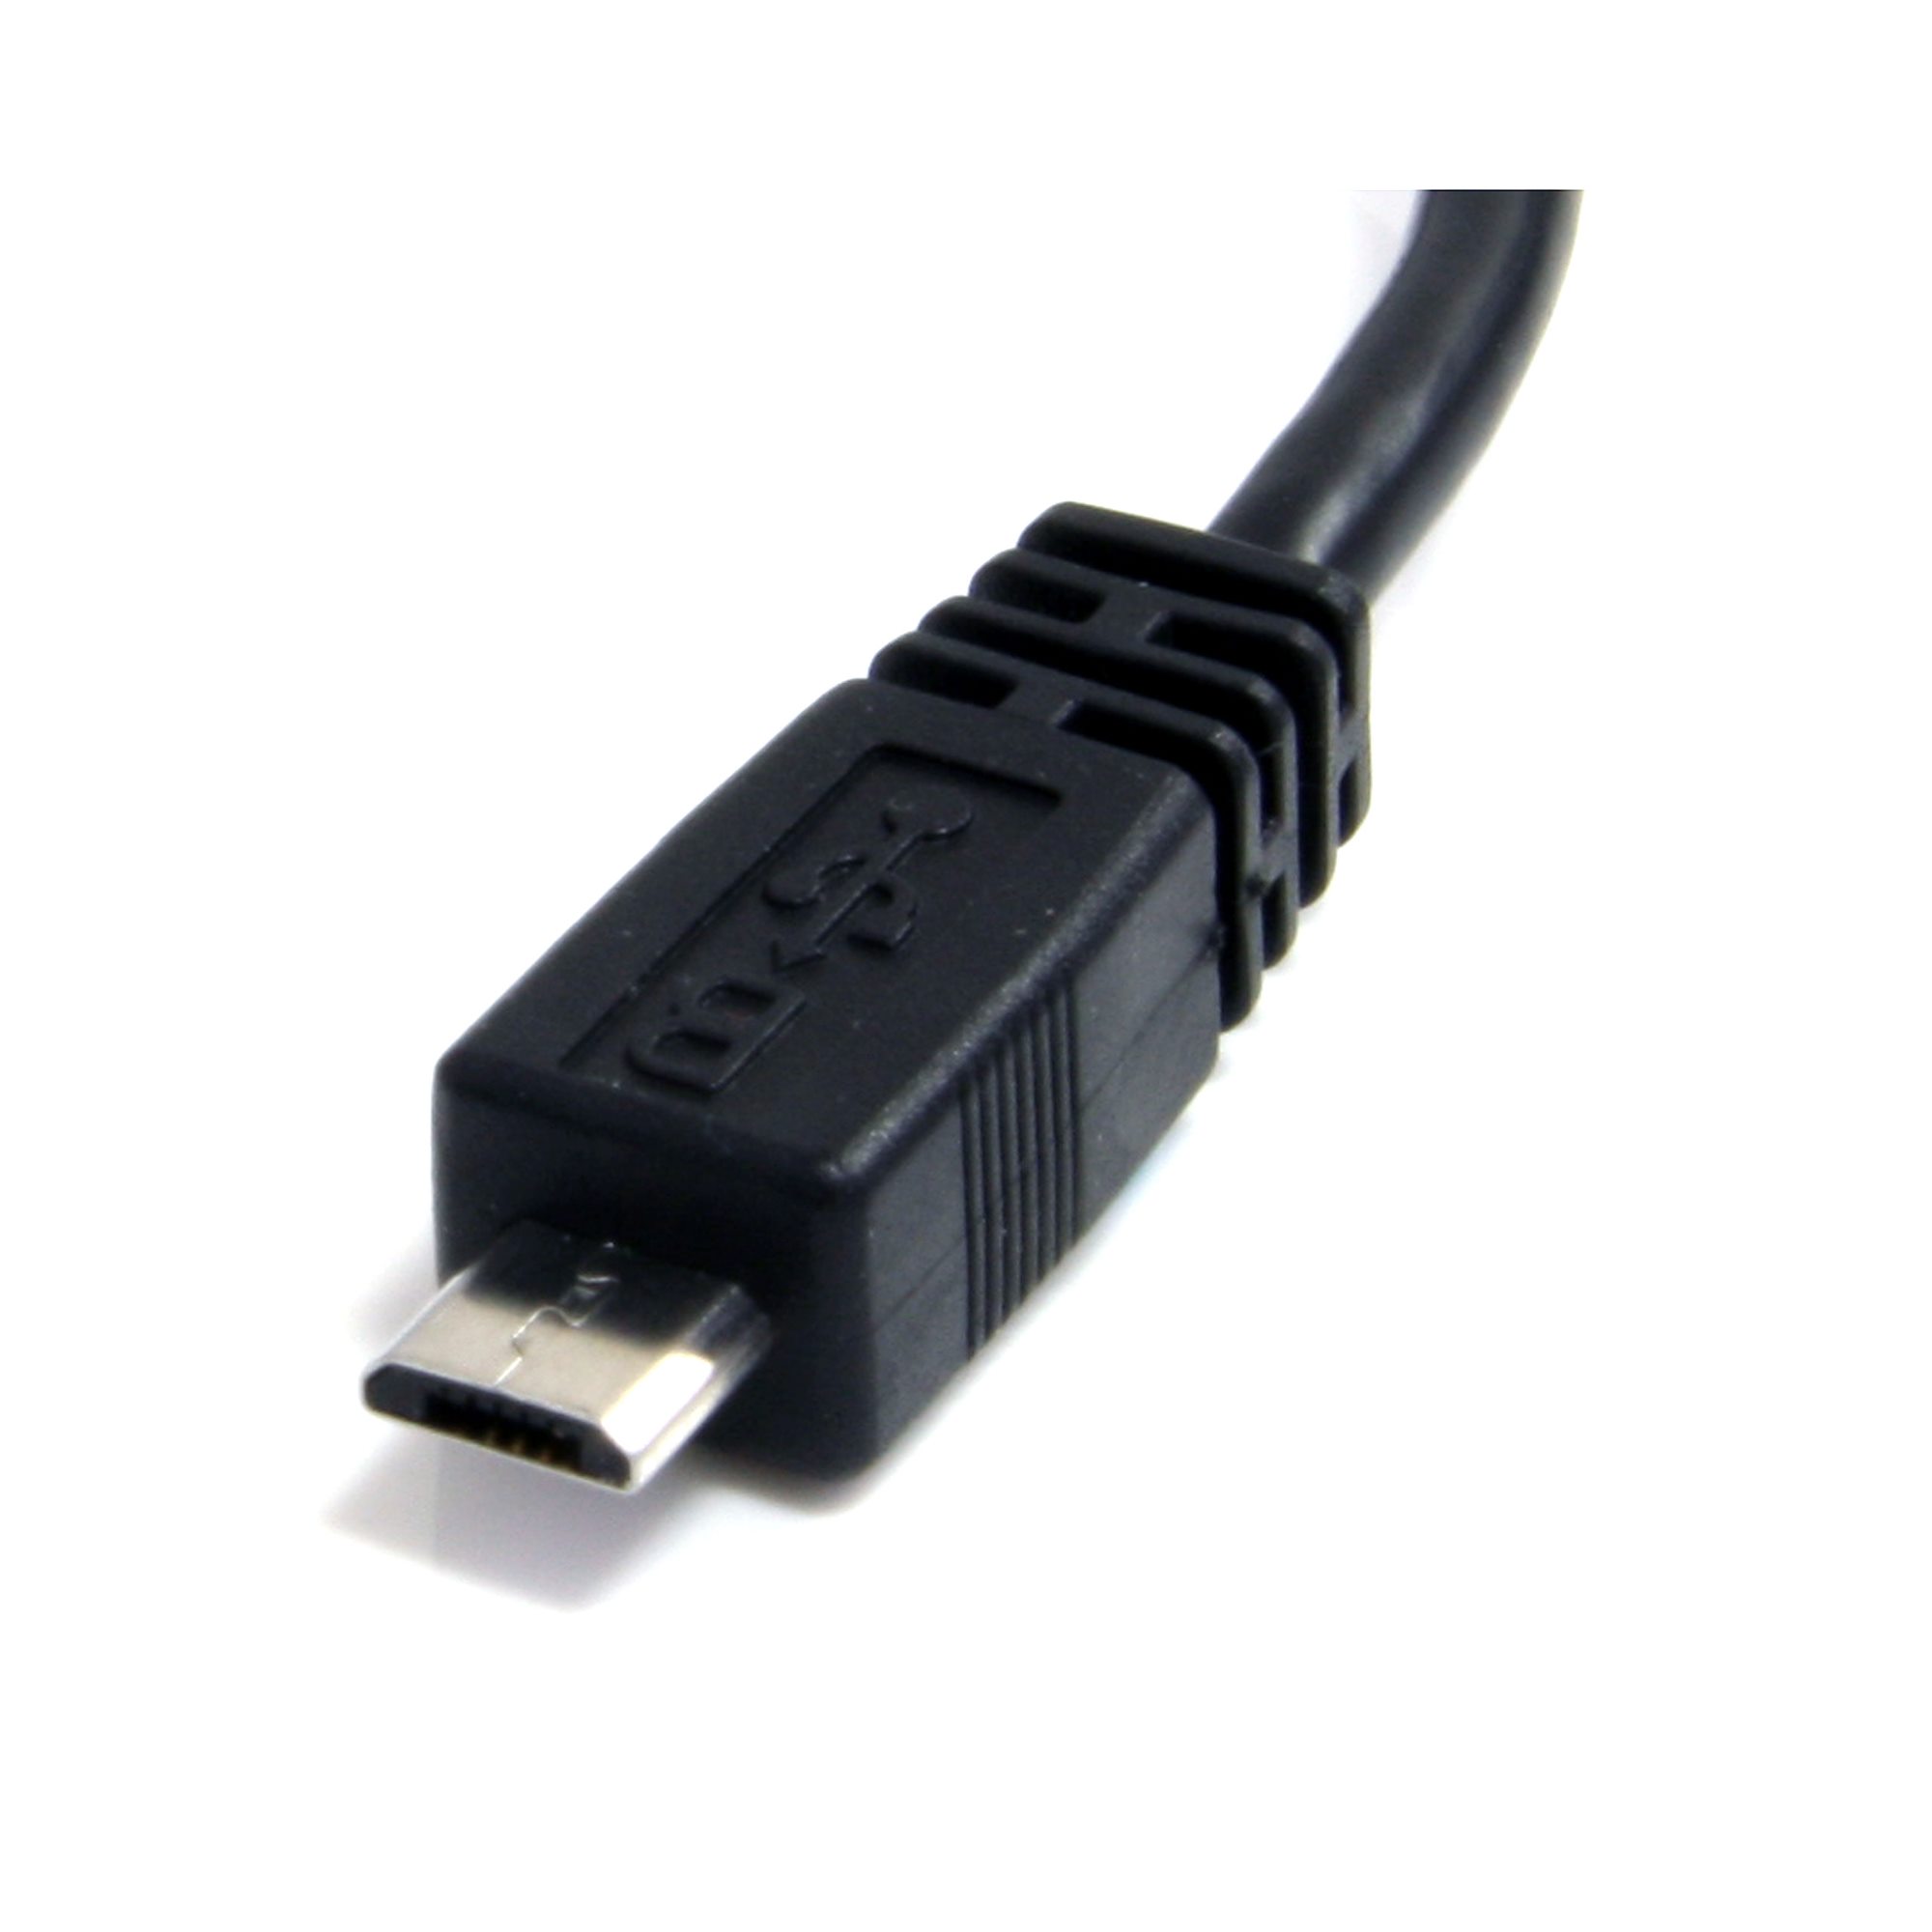 6in USB Micro-B to USB-A OTG Adapter Cable